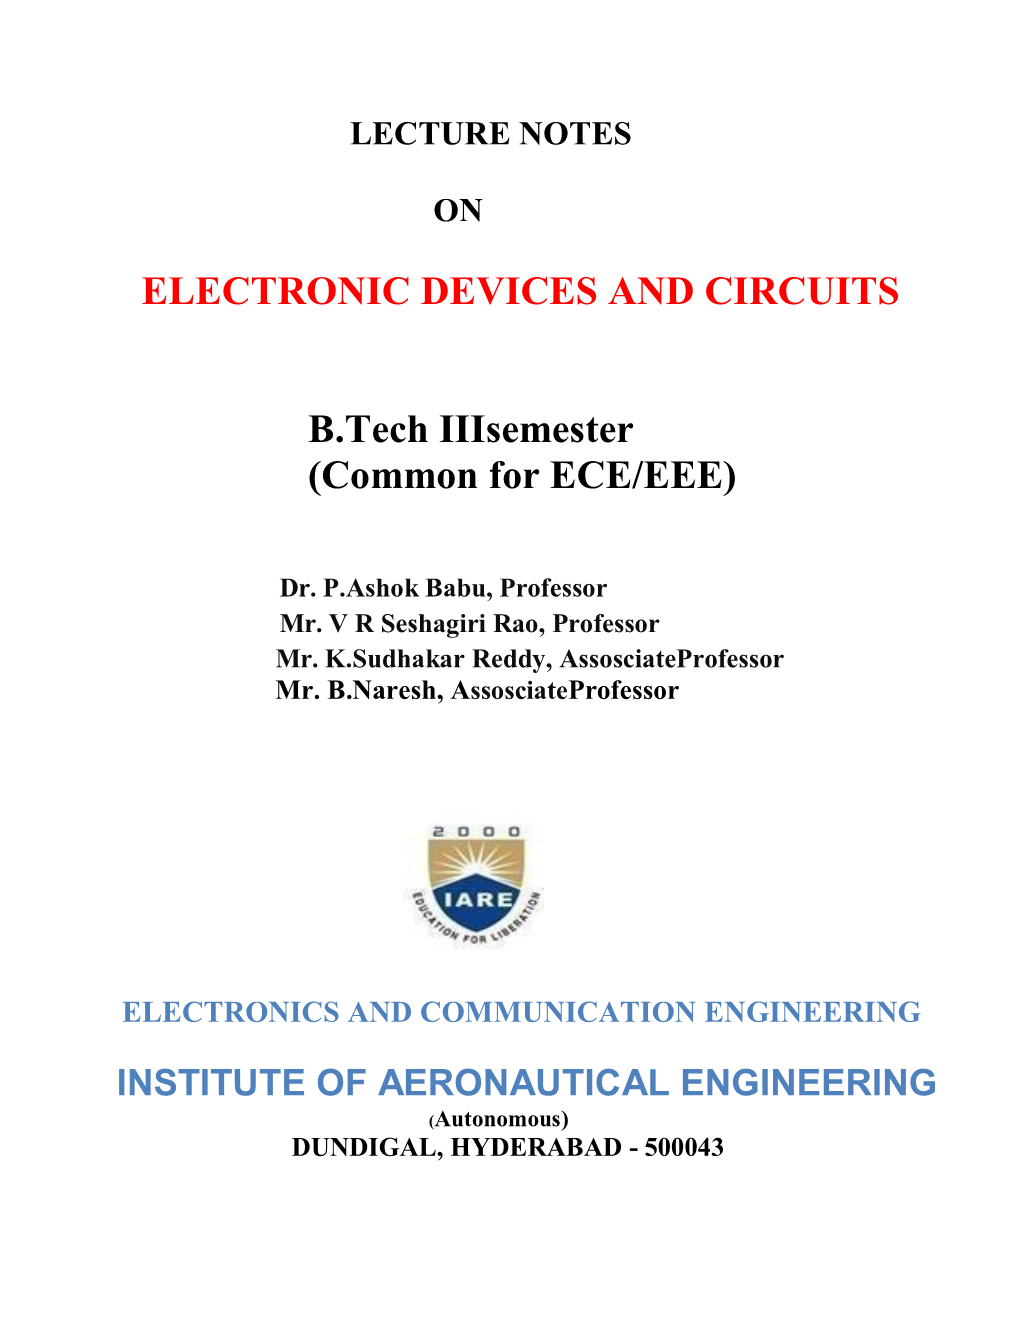 ELECTRONIC DEVICES and CIRCUITS B.Tech Iiisemester